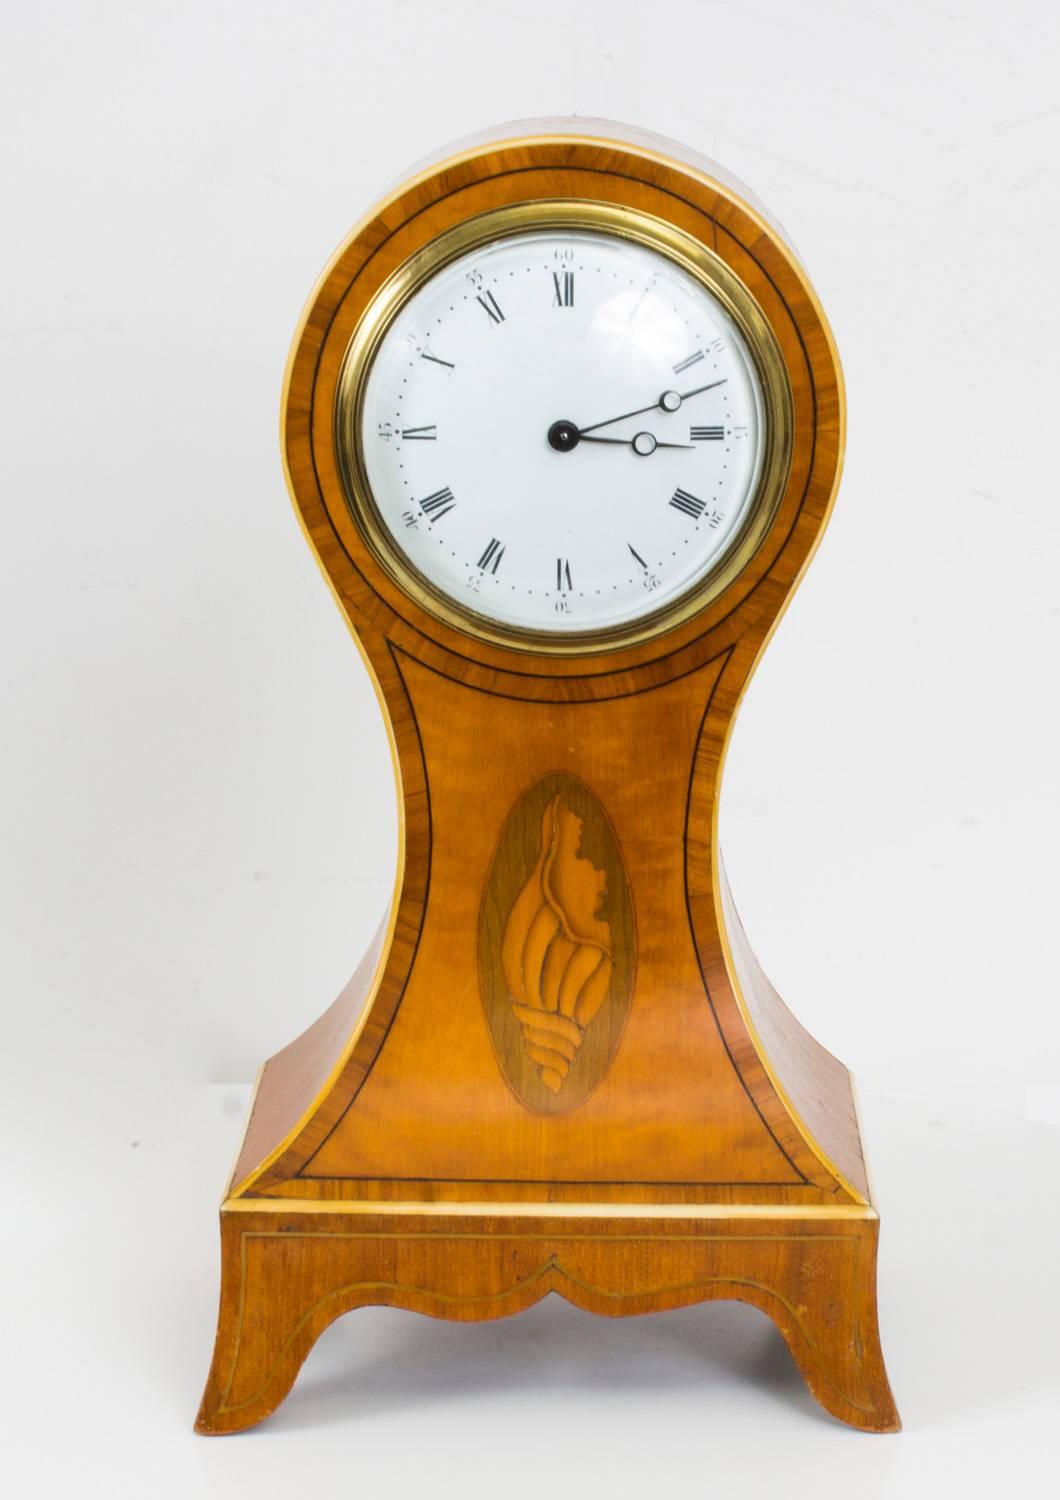 This is a pretty antique Edwardian inlaid satinwood mantel clock, circa 1900 in date, it comes complete with the original winding key.

It has a beautiful beautiful balloon shaped case with ebony string inlay and conch shell detail, with enamelled